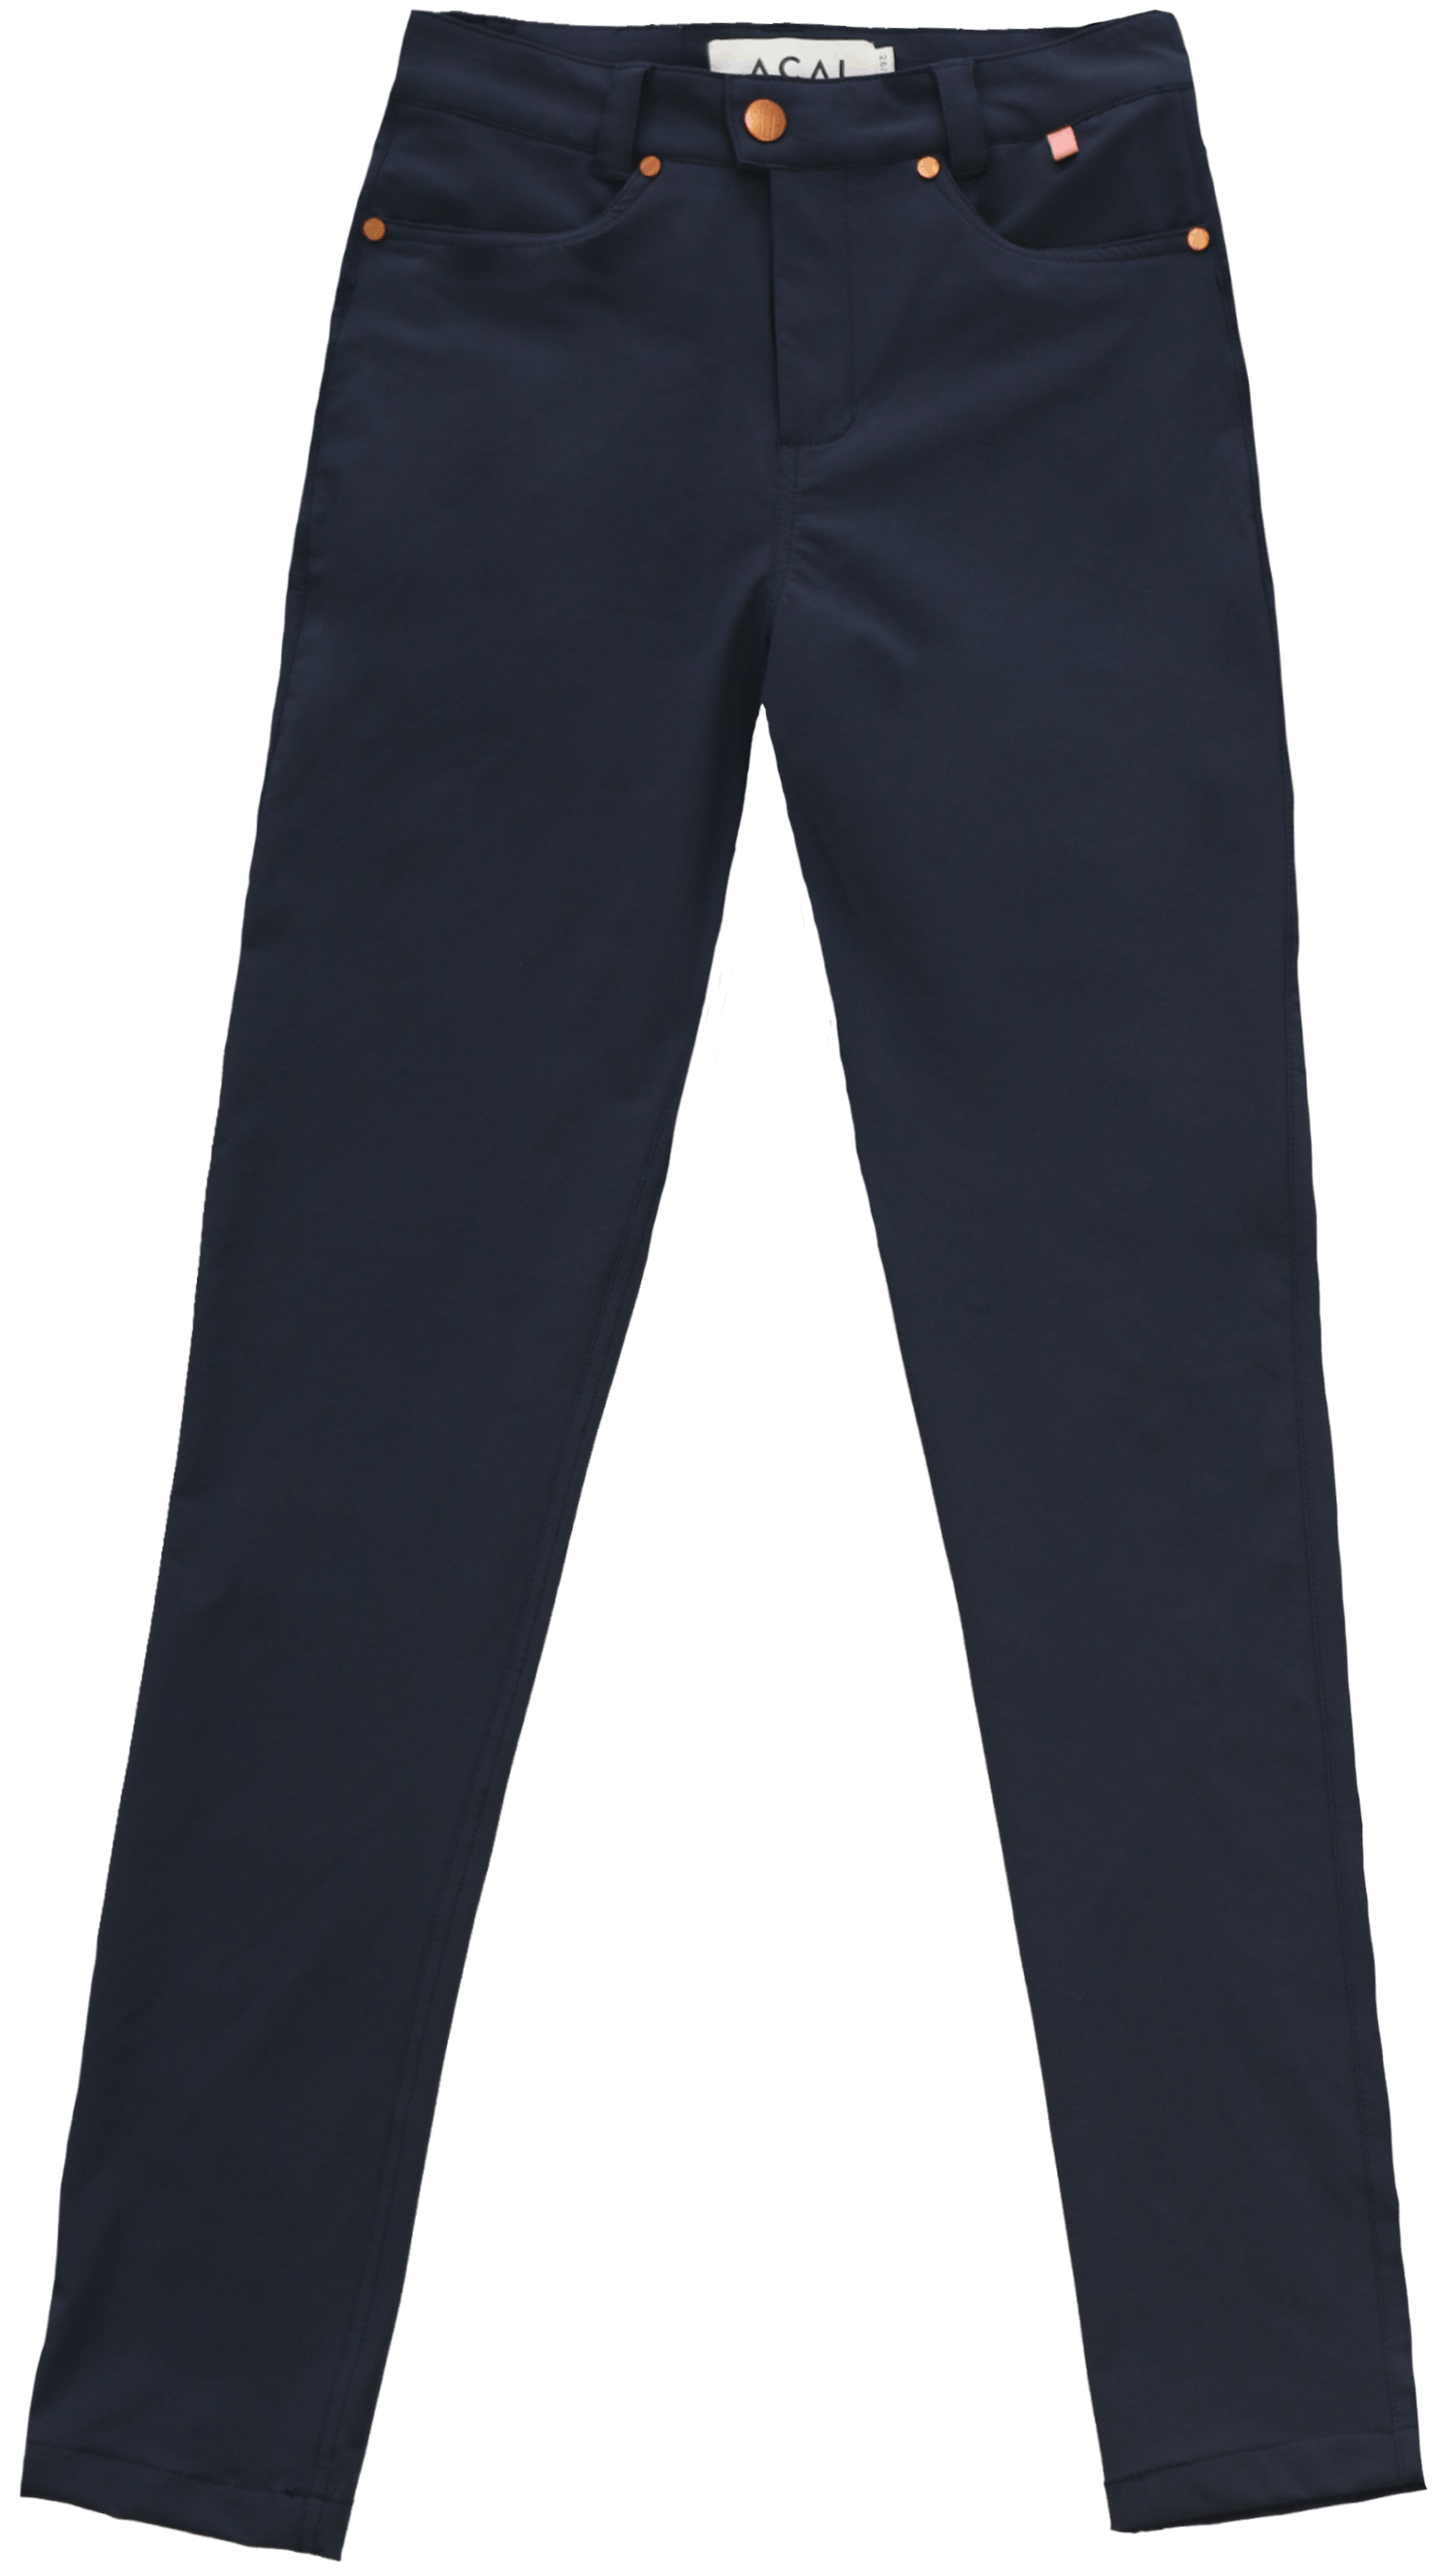 Graphite Thermal Skinny Outdoor Trousers, £84